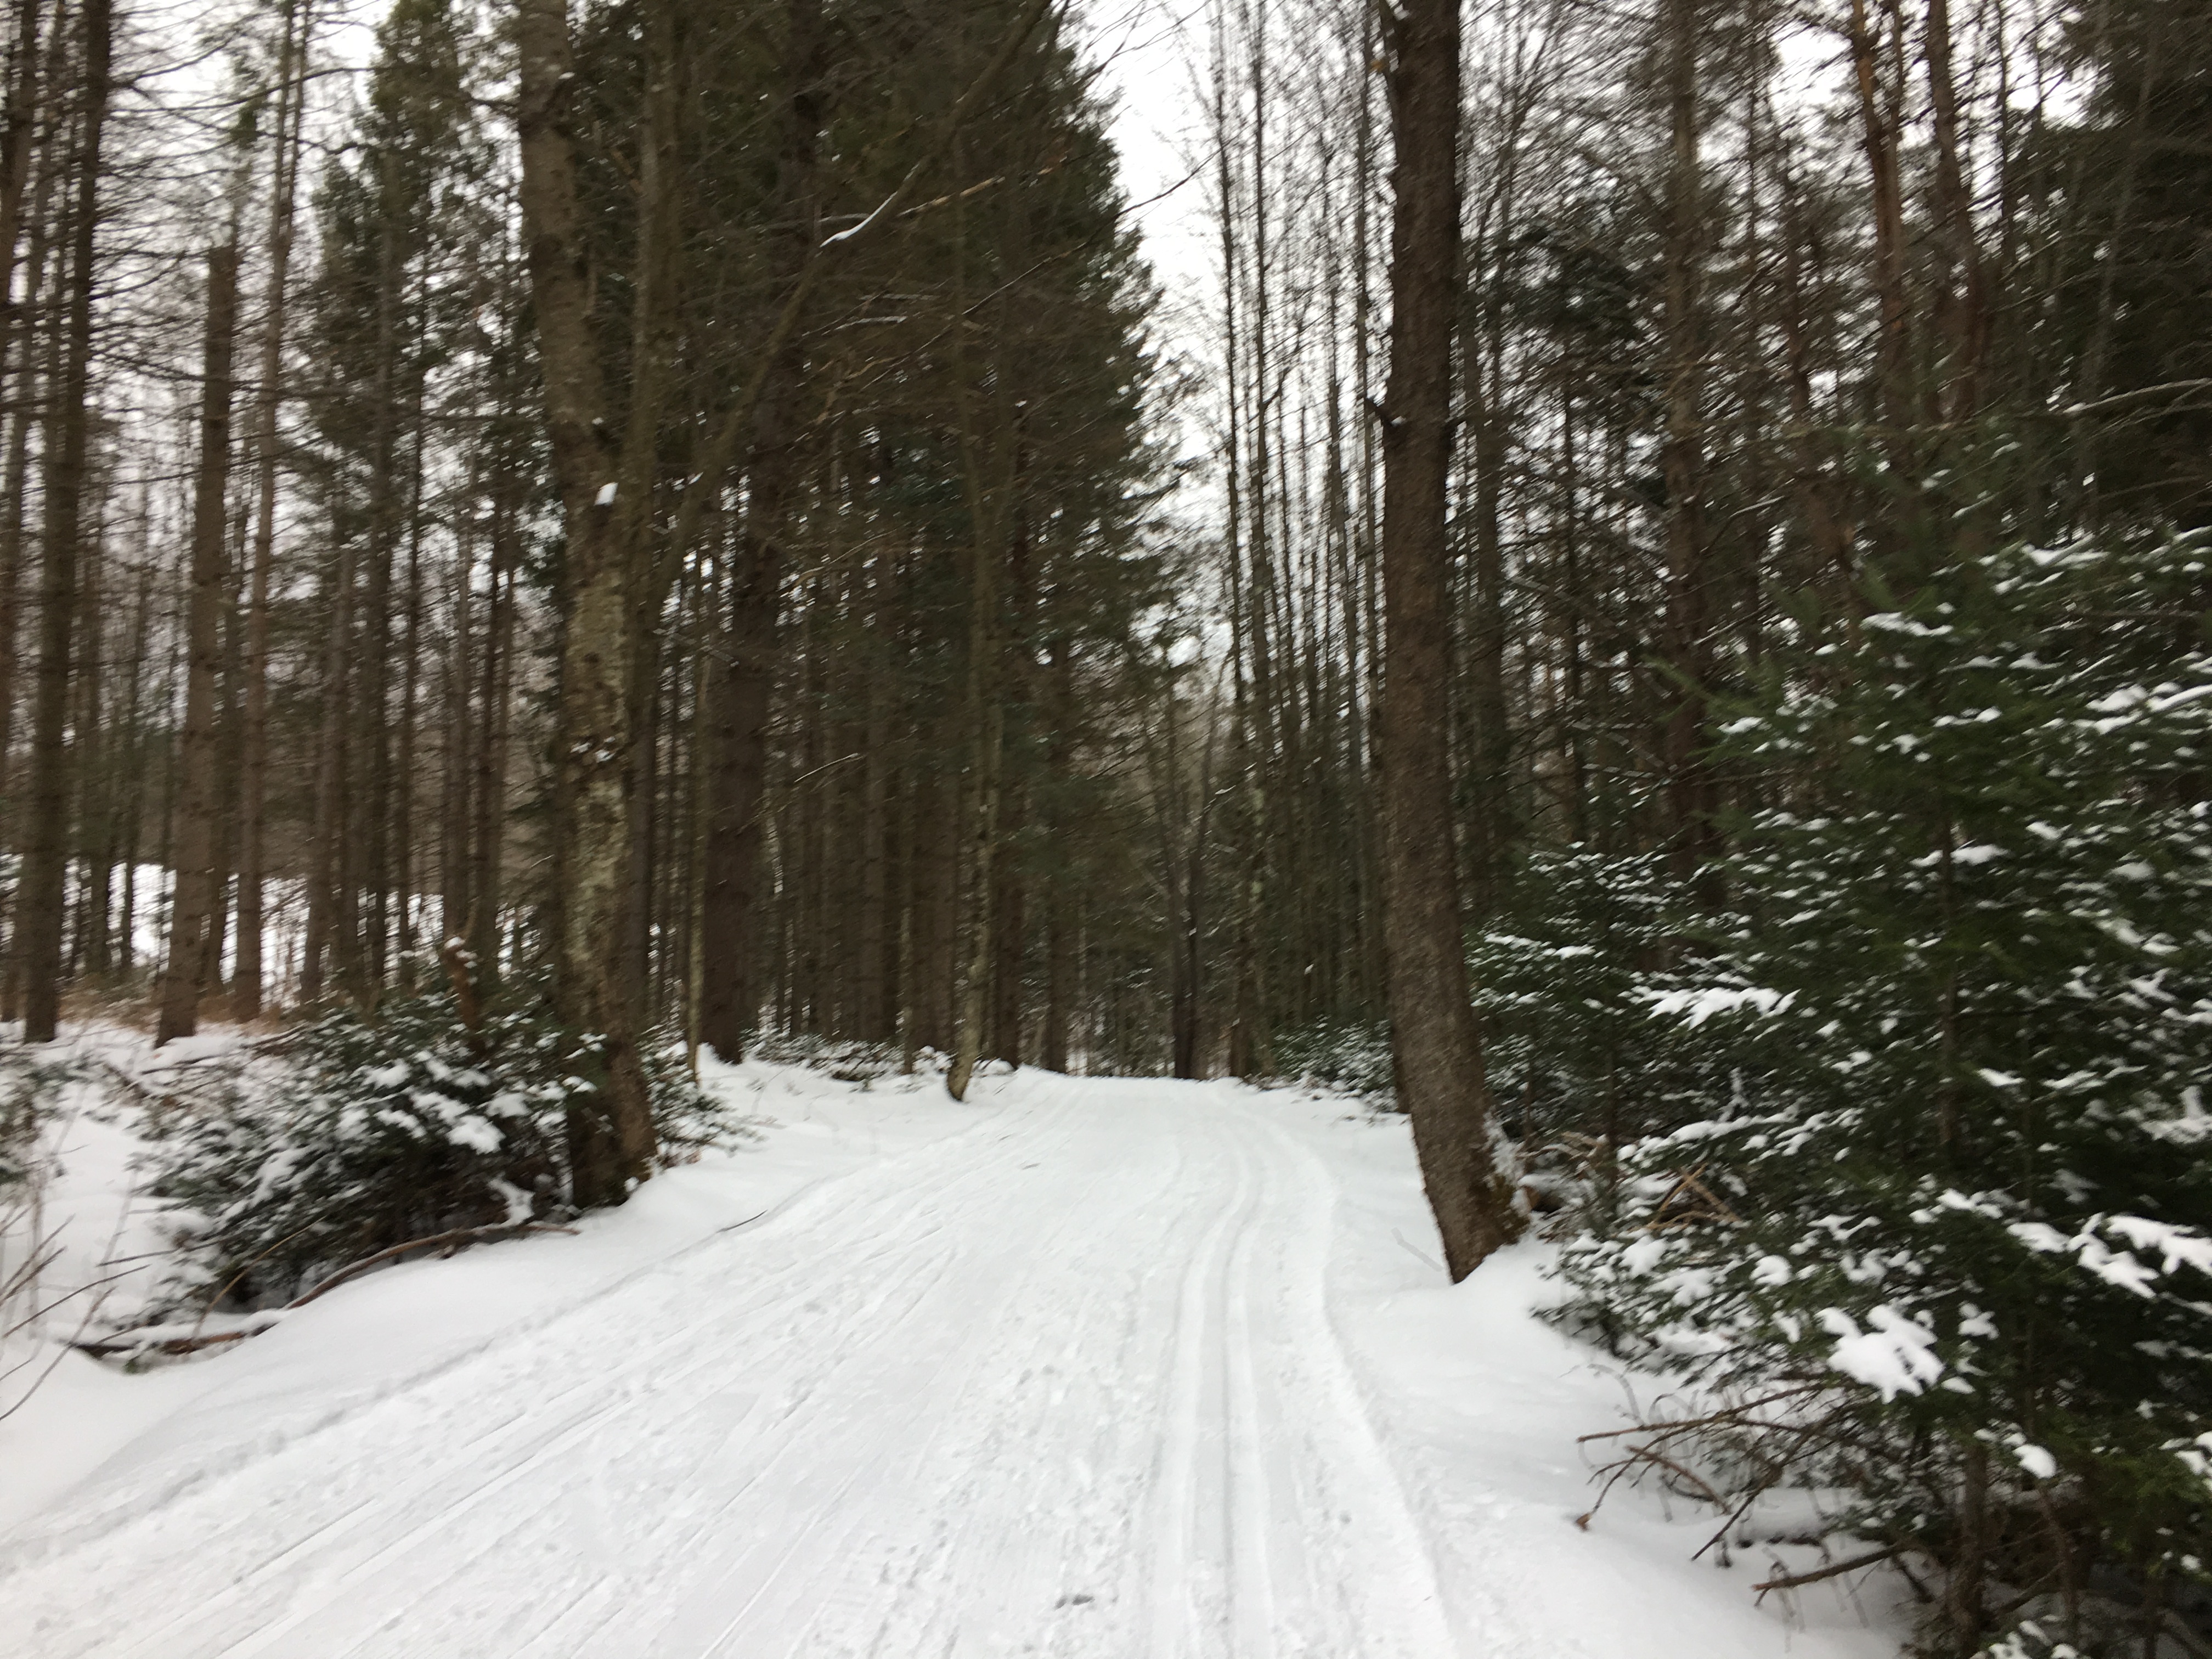 Vegan Travel - Winter Day Trip To Mad River Valley Vermont